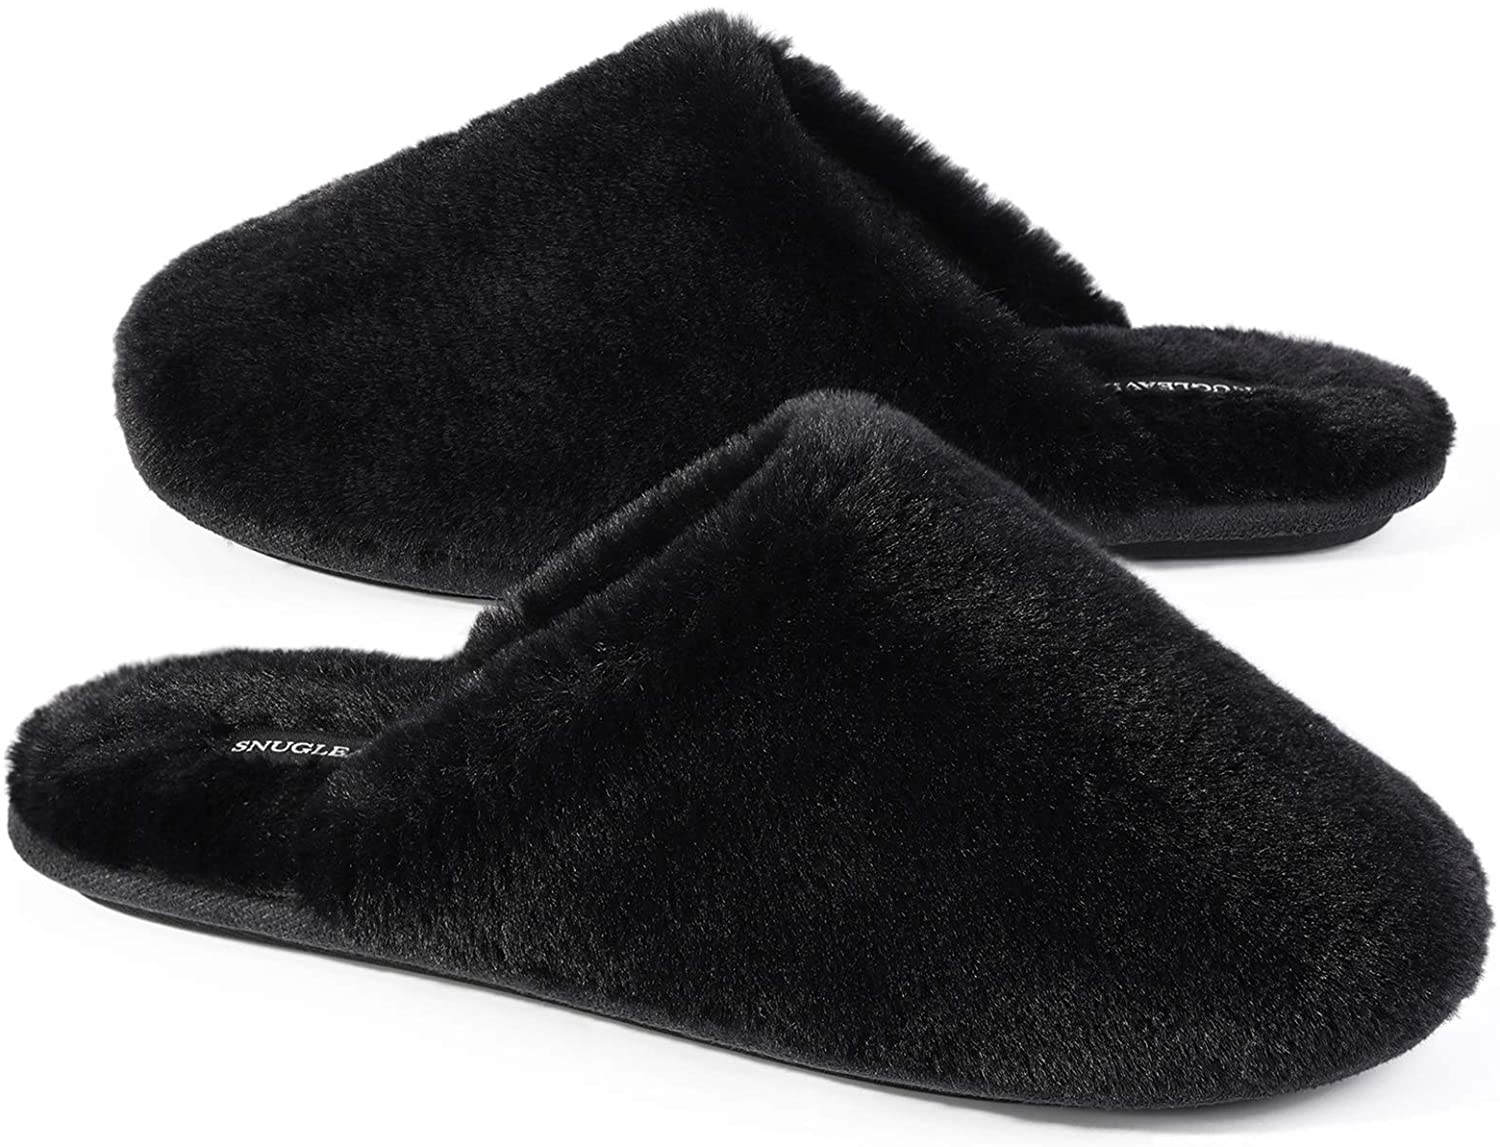 Snug Leaves Ladies Fluffy Memory Foam Slip On Slippers with Cozy Faux Fur Lined House Shoes